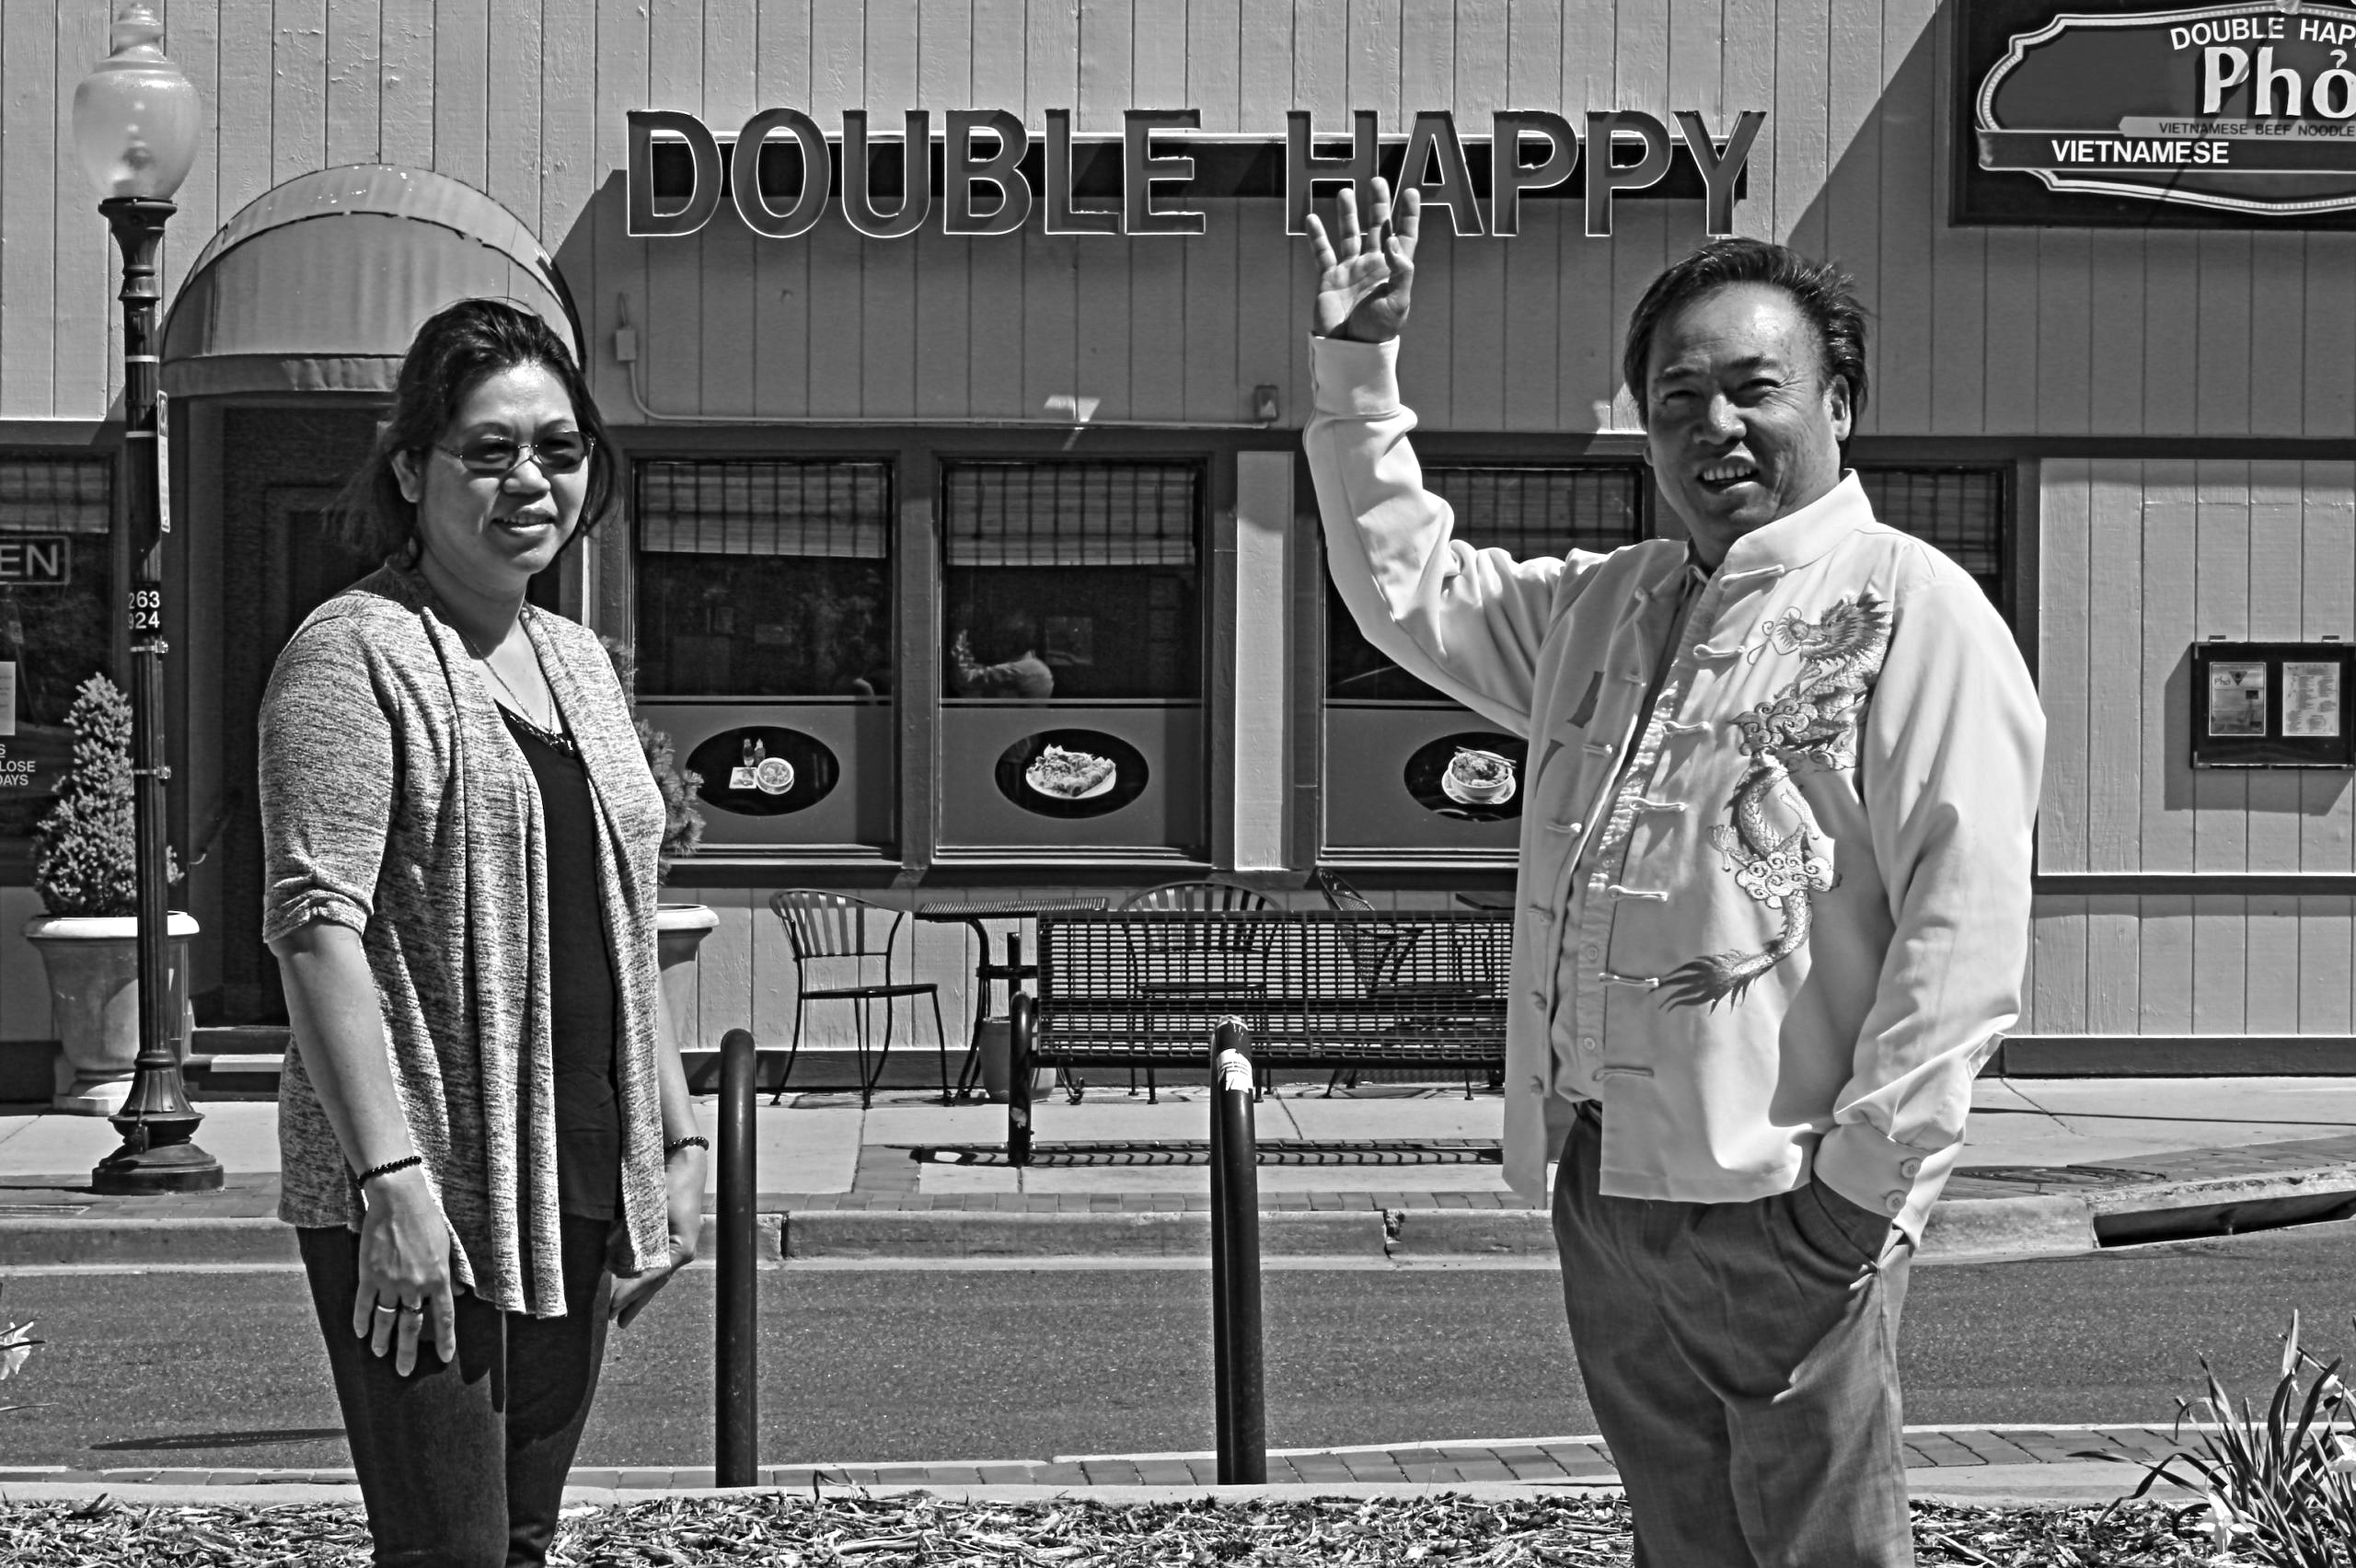 Double Happy — the Longest Continuing Running Business in Downtown Louisville!